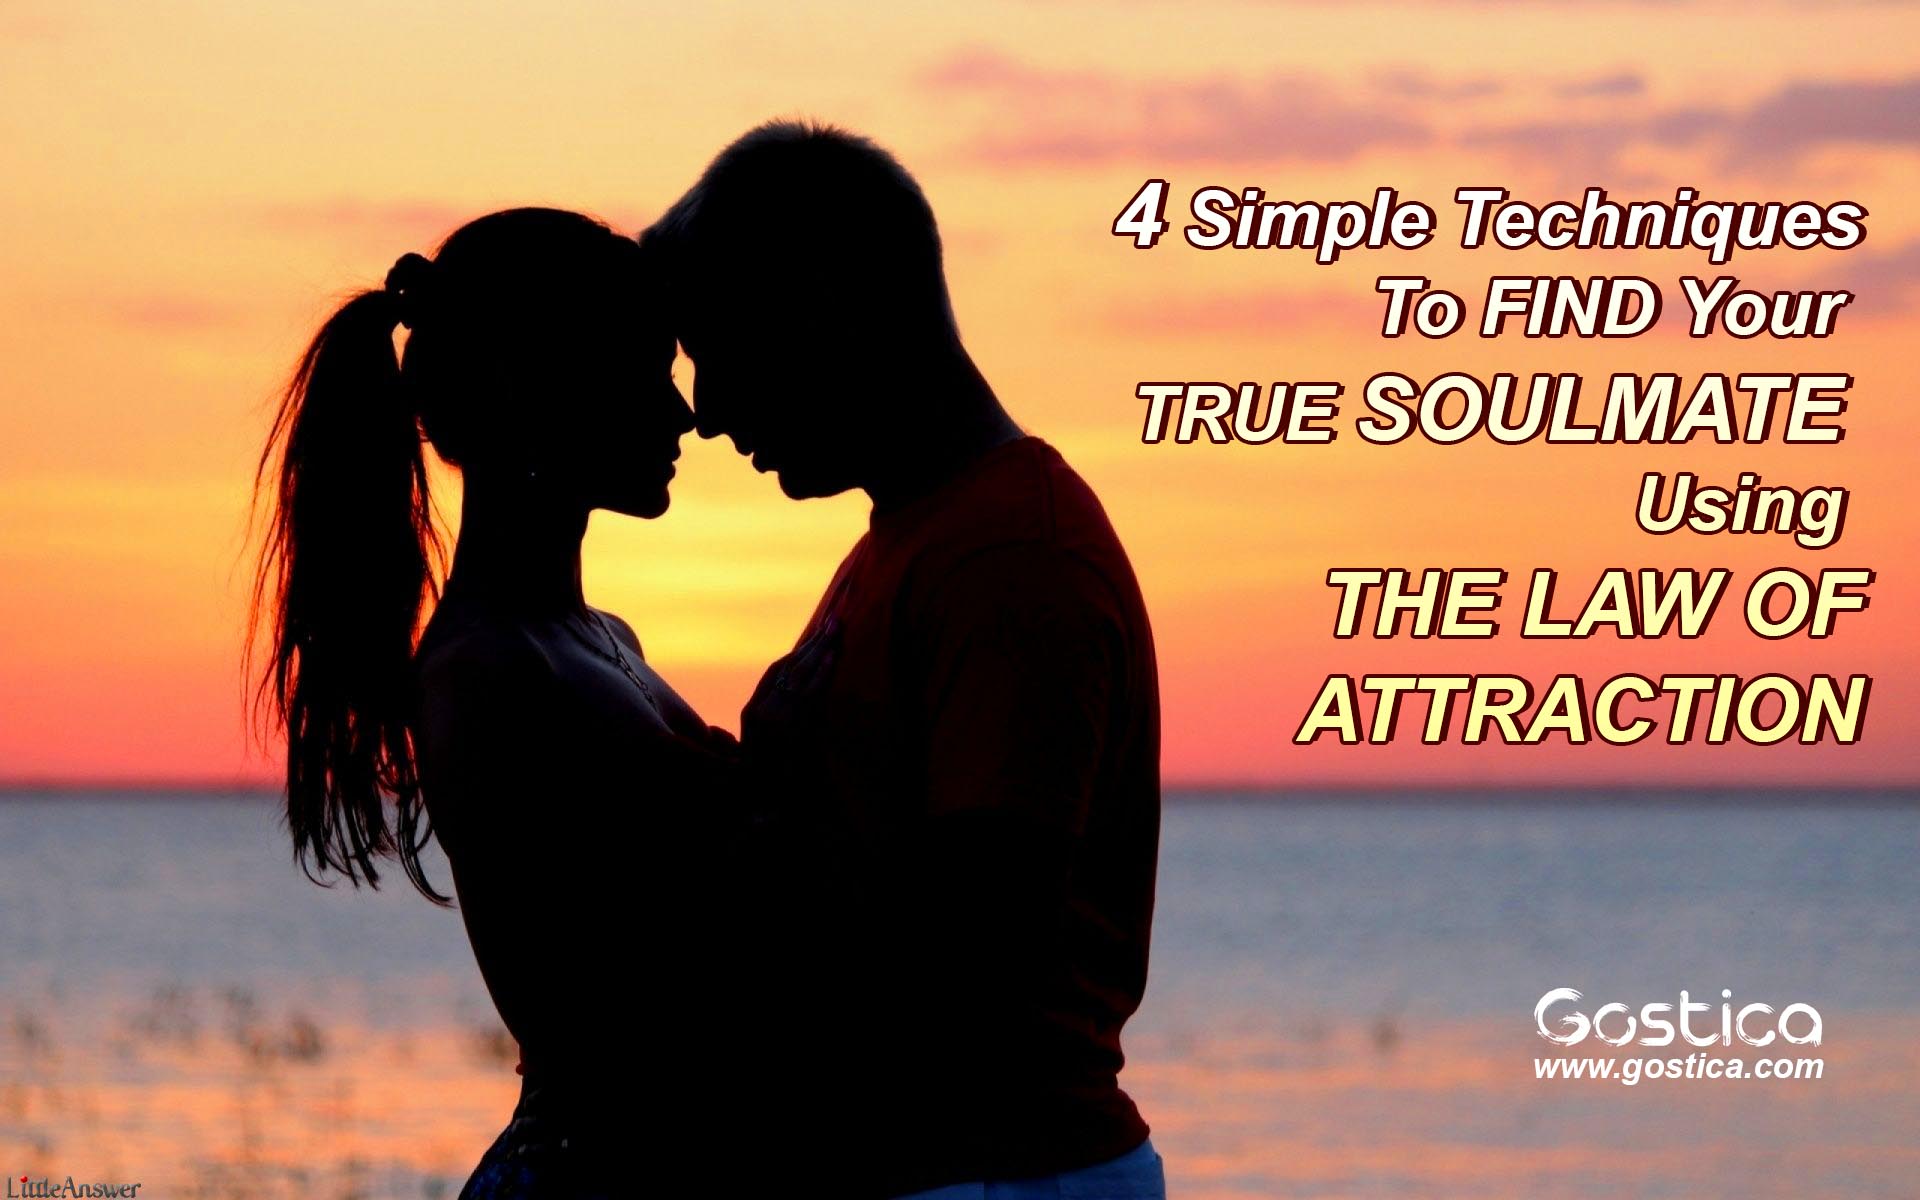 4-Simple-Techniques-To-FIND-Your-TRUE-SOULMATE-Using-THE-LAW-OF-ATTRACTION.jpg